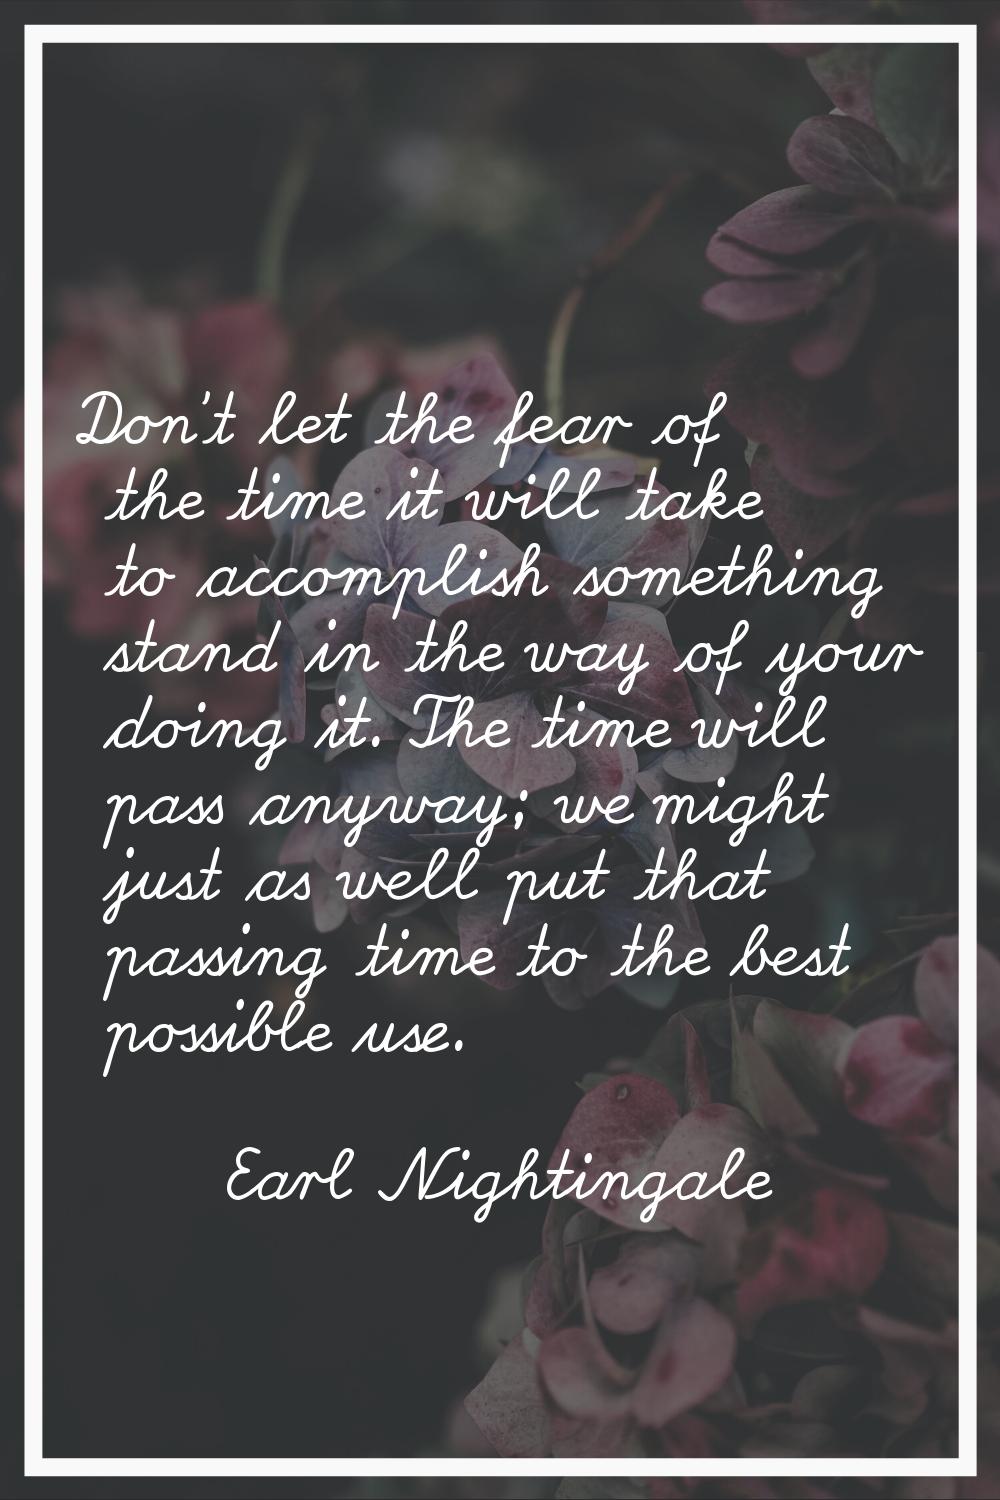 Don't let the fear of the time it will take to accomplish something stand in the way of your doing 